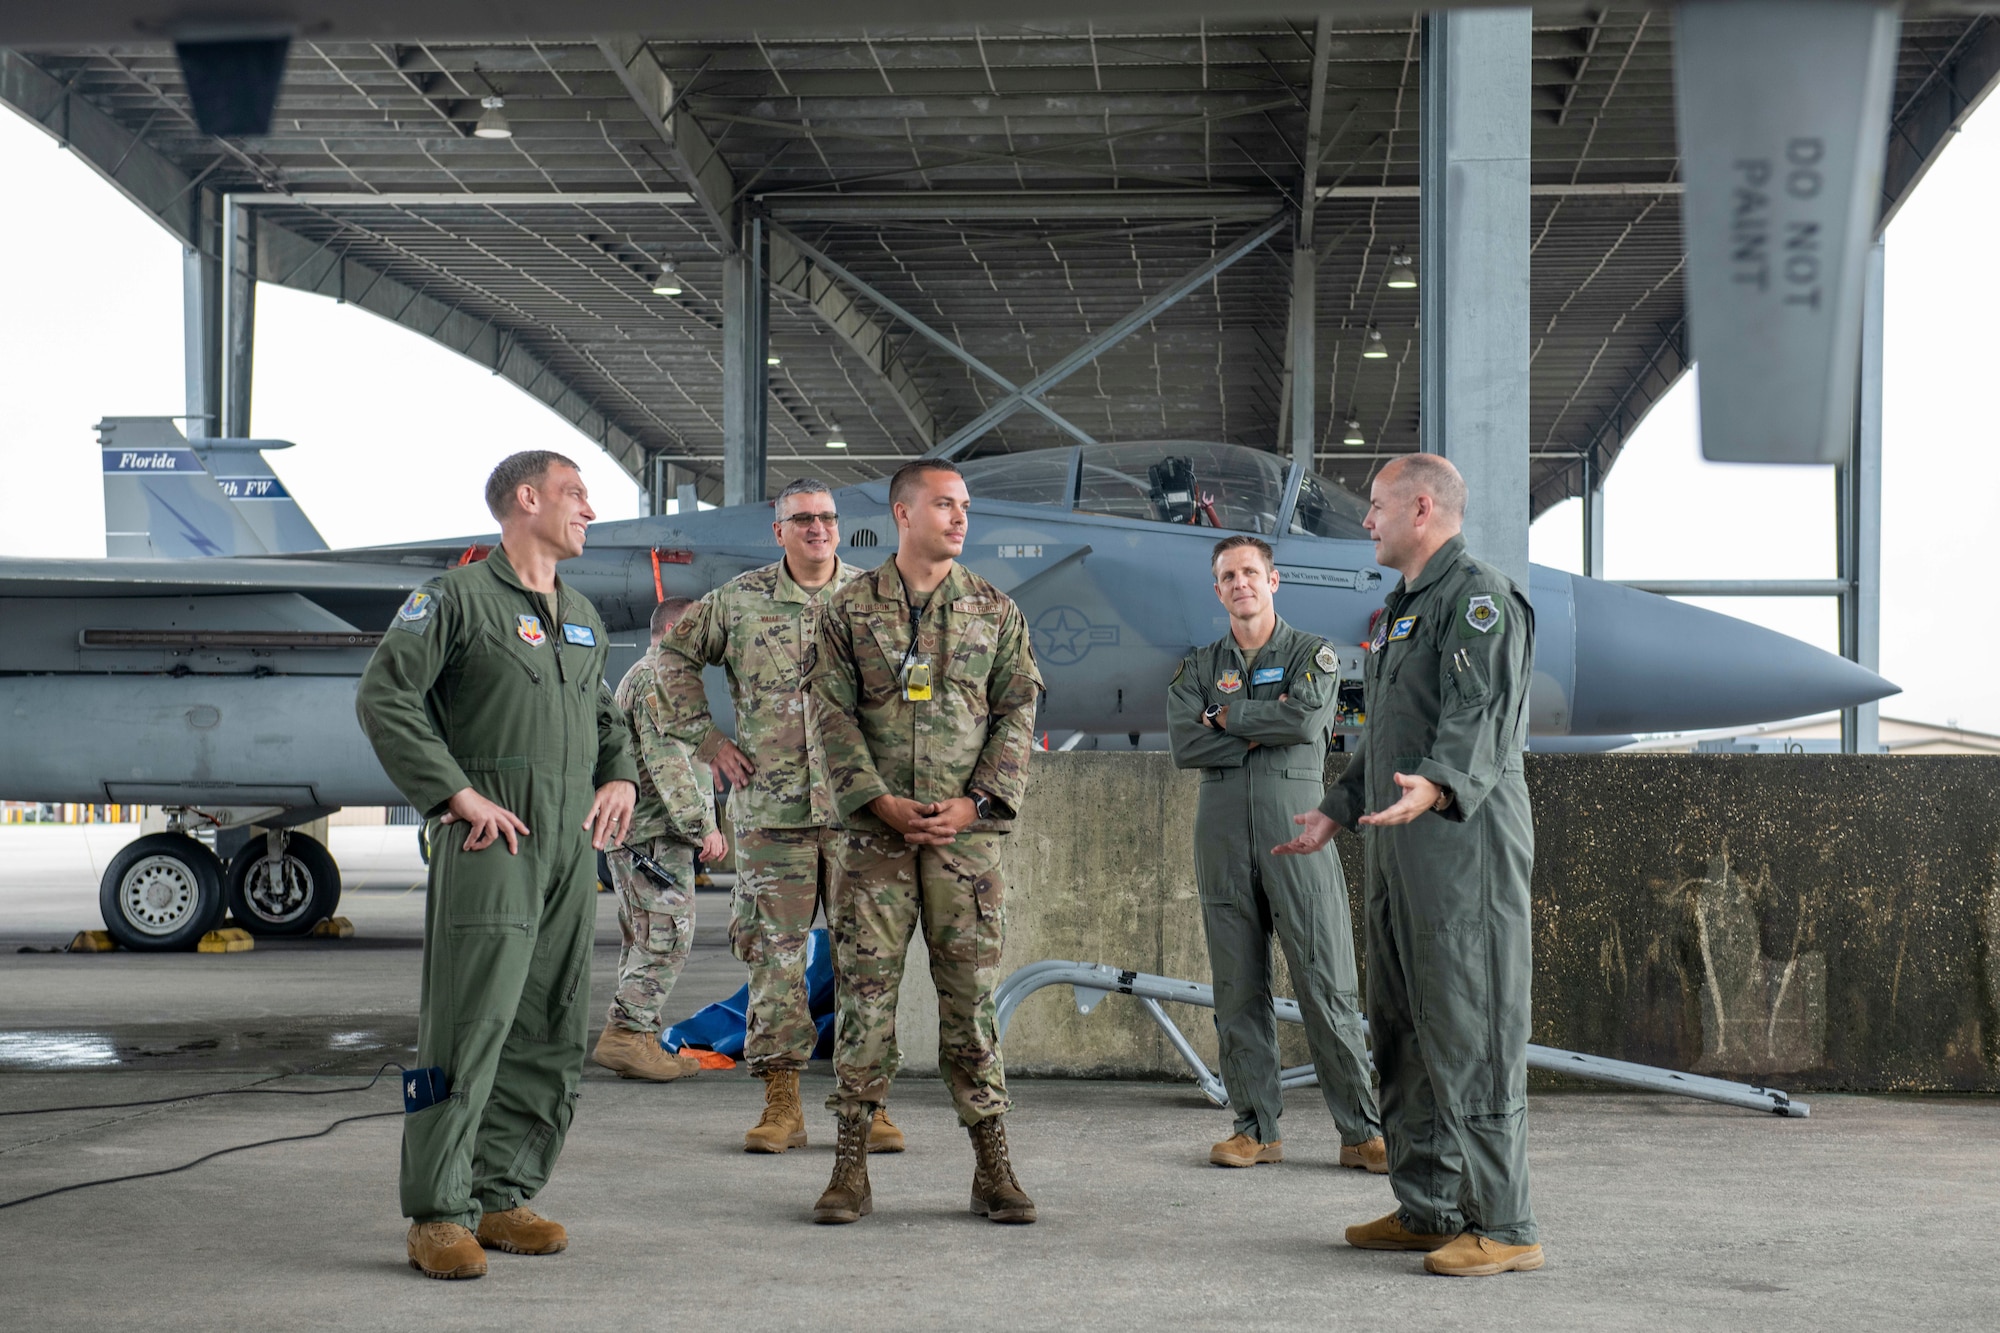 From left: U.S. Air Force Col. George Downs, commander, 125th Fighter Wing, Florida National Gurd, Brig. Gen. Michael Valle, assistant adjutant general – Air, Florida National Guard, Staff Sgt. Bryce Paulson, crew chief, 125th Aircraft Maintenance, 125th Fighter Wing, Lt. Col. Jonathan Kassebaum, unit conversion director, F-35A Lightning II, and Maj. Gen. Duke Pirak, deputy director, Air National Guard, talk while on the flightline of the Jacksonville Air National Guard Base, Florida, Sept. 13, 2022. Pirak was welcomed by 125th Fighter Wing officials for a mission brief, an F-35A Lightning II conversion update and meet-and-greet with Airmen. (U.S. Air National Guard photo by Tech. Sgt. Chelsea Smith) (This image was altered for security reasons to blur out line badge information)